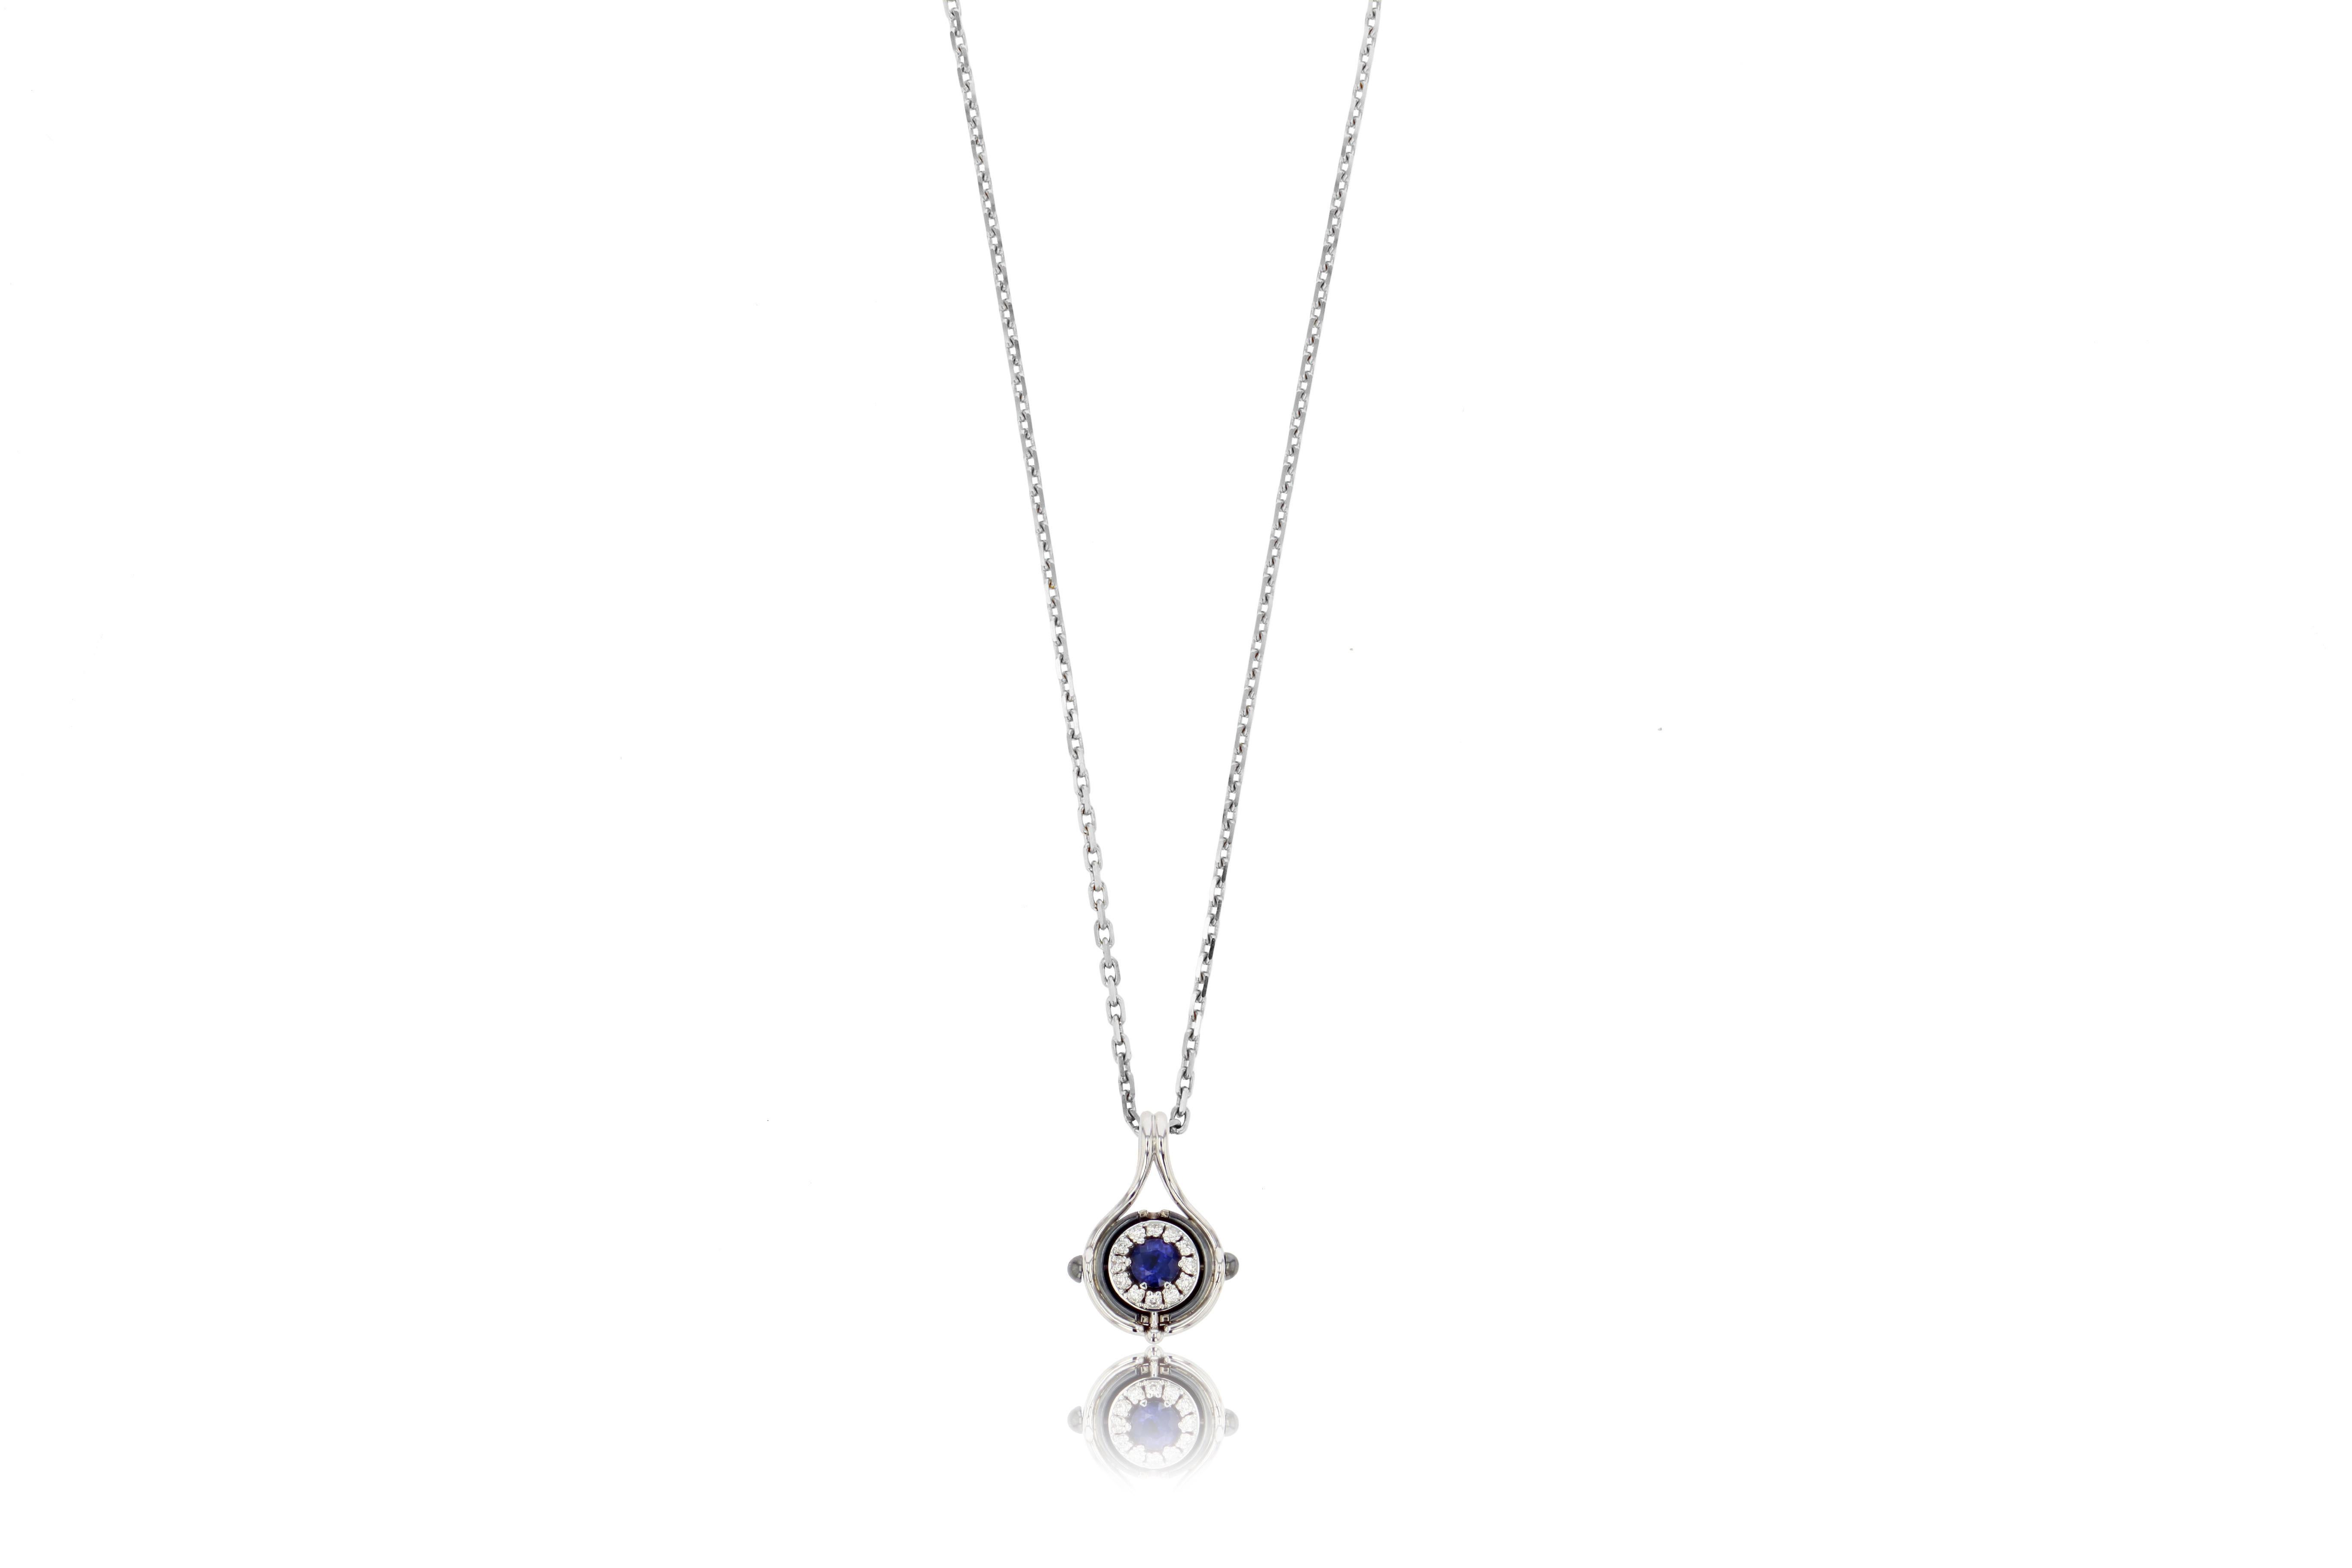 Cushion Cut Blue Sapphire Diamonds Mira Pendant Necklace in 18k White Gold by Elie Top